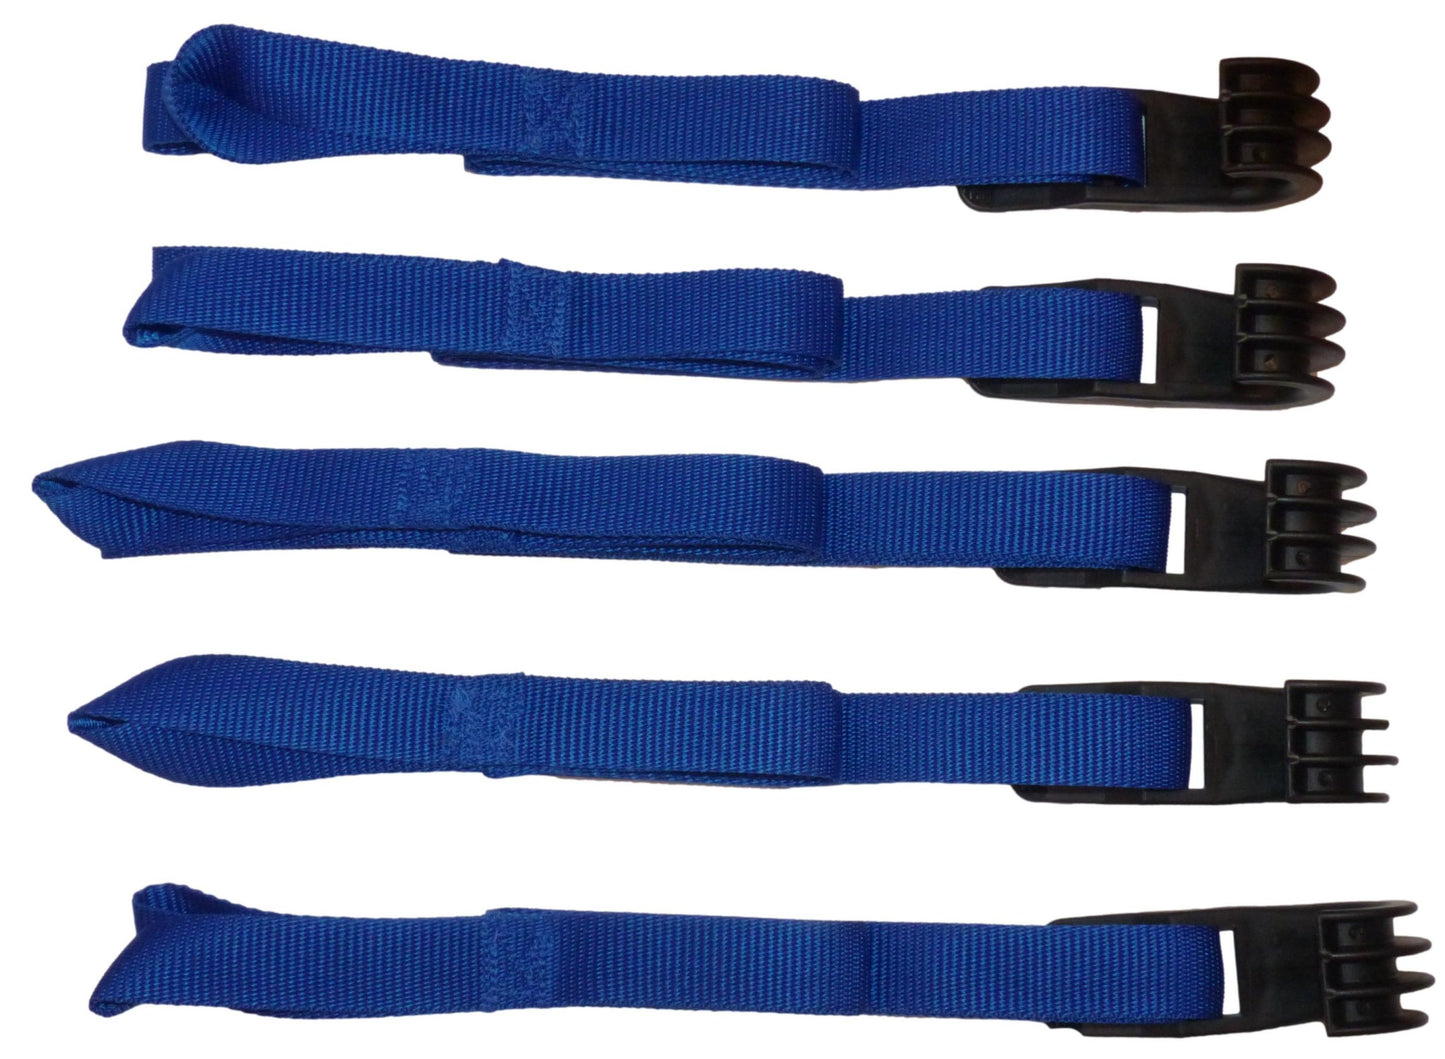 Benristraps Roll Cage, Trolley, Pallet Straps (Pack of 5) in blue